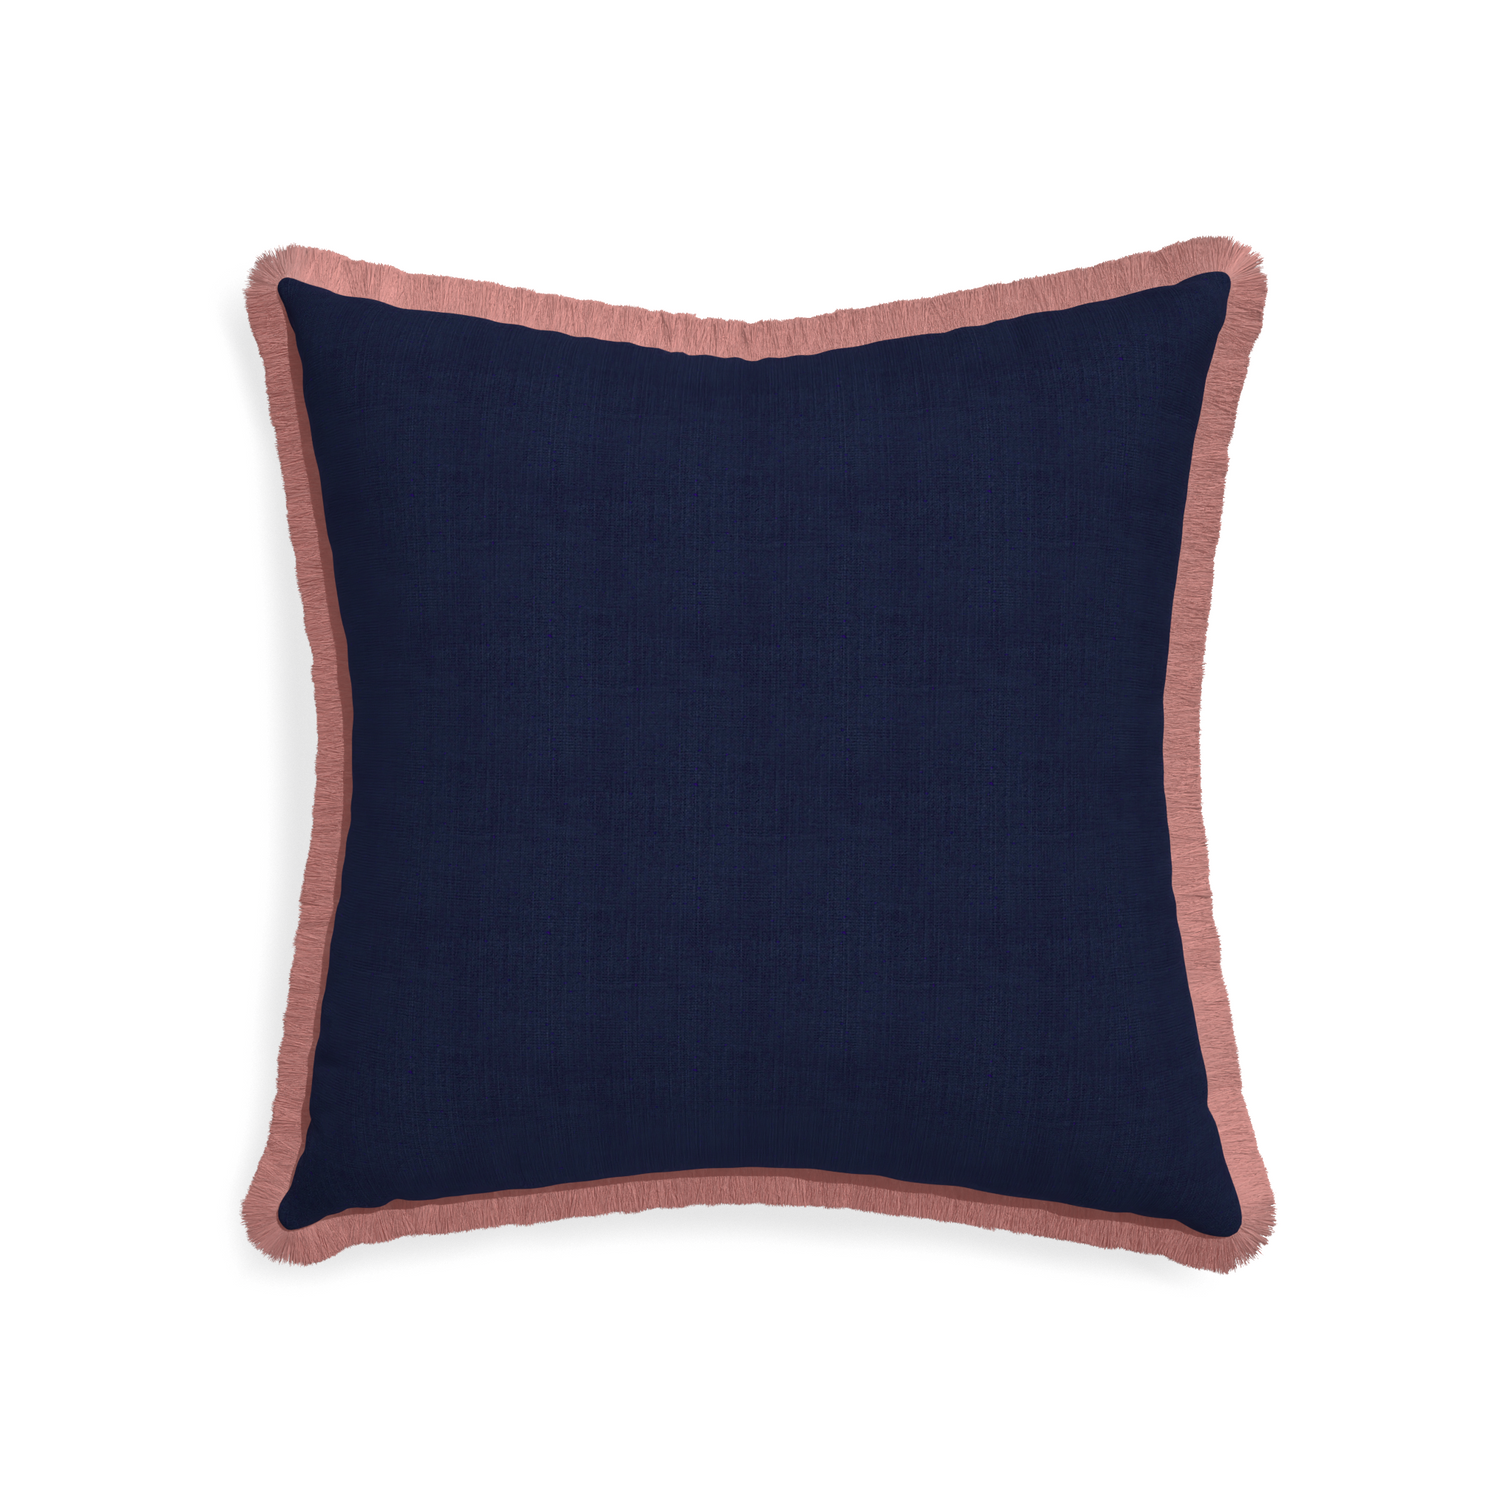 22-square midnight custom navy bluepillow with d fringe on white background